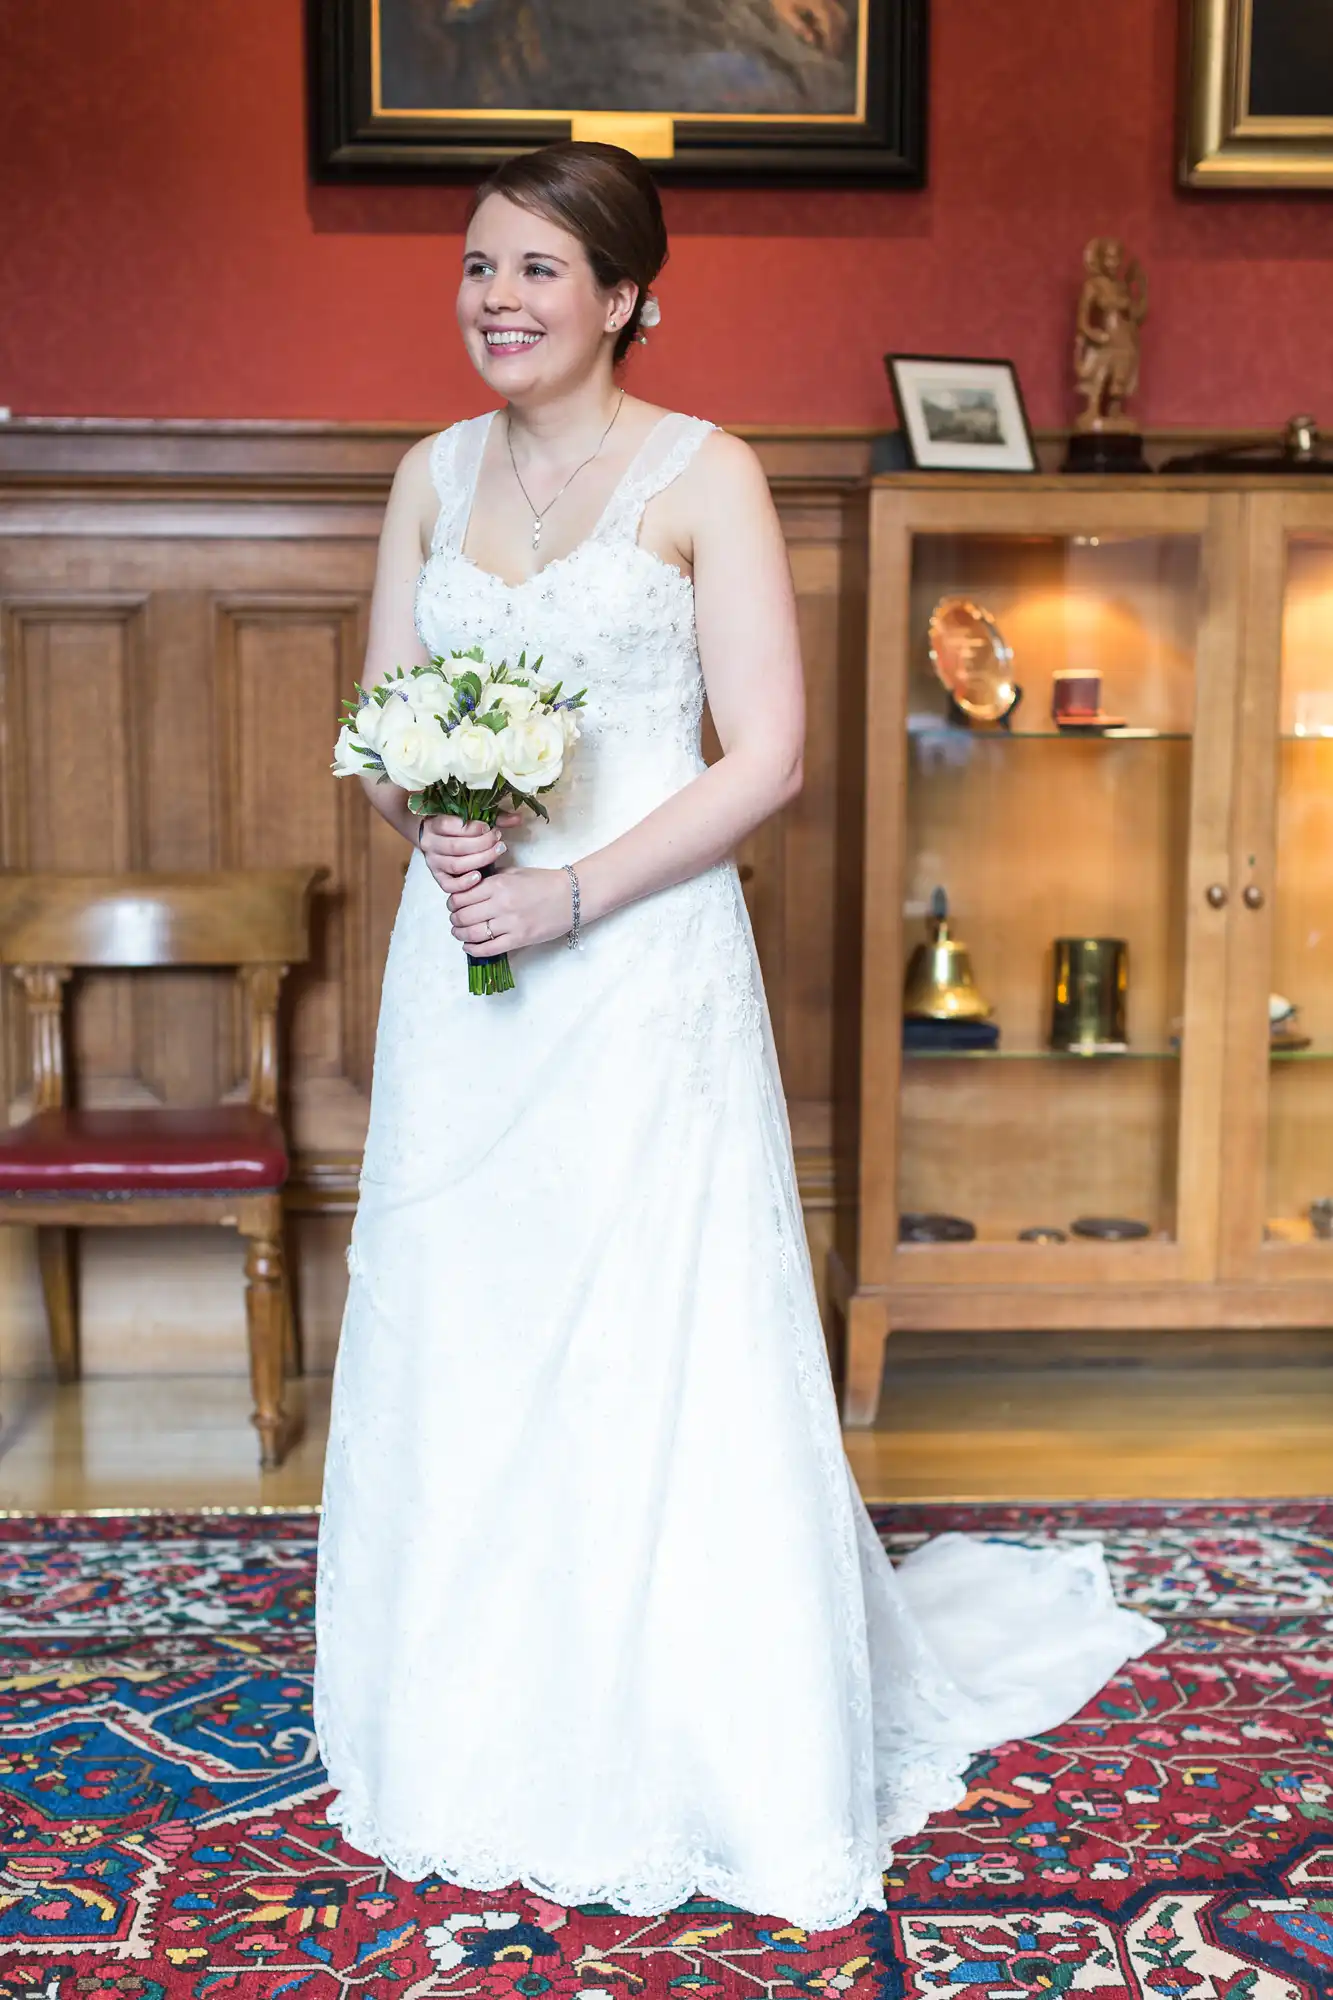 A bride in a white lace gown holding a bouquet of white flowers, standing in a room with a wooden cabinet and a red patterned carpet.